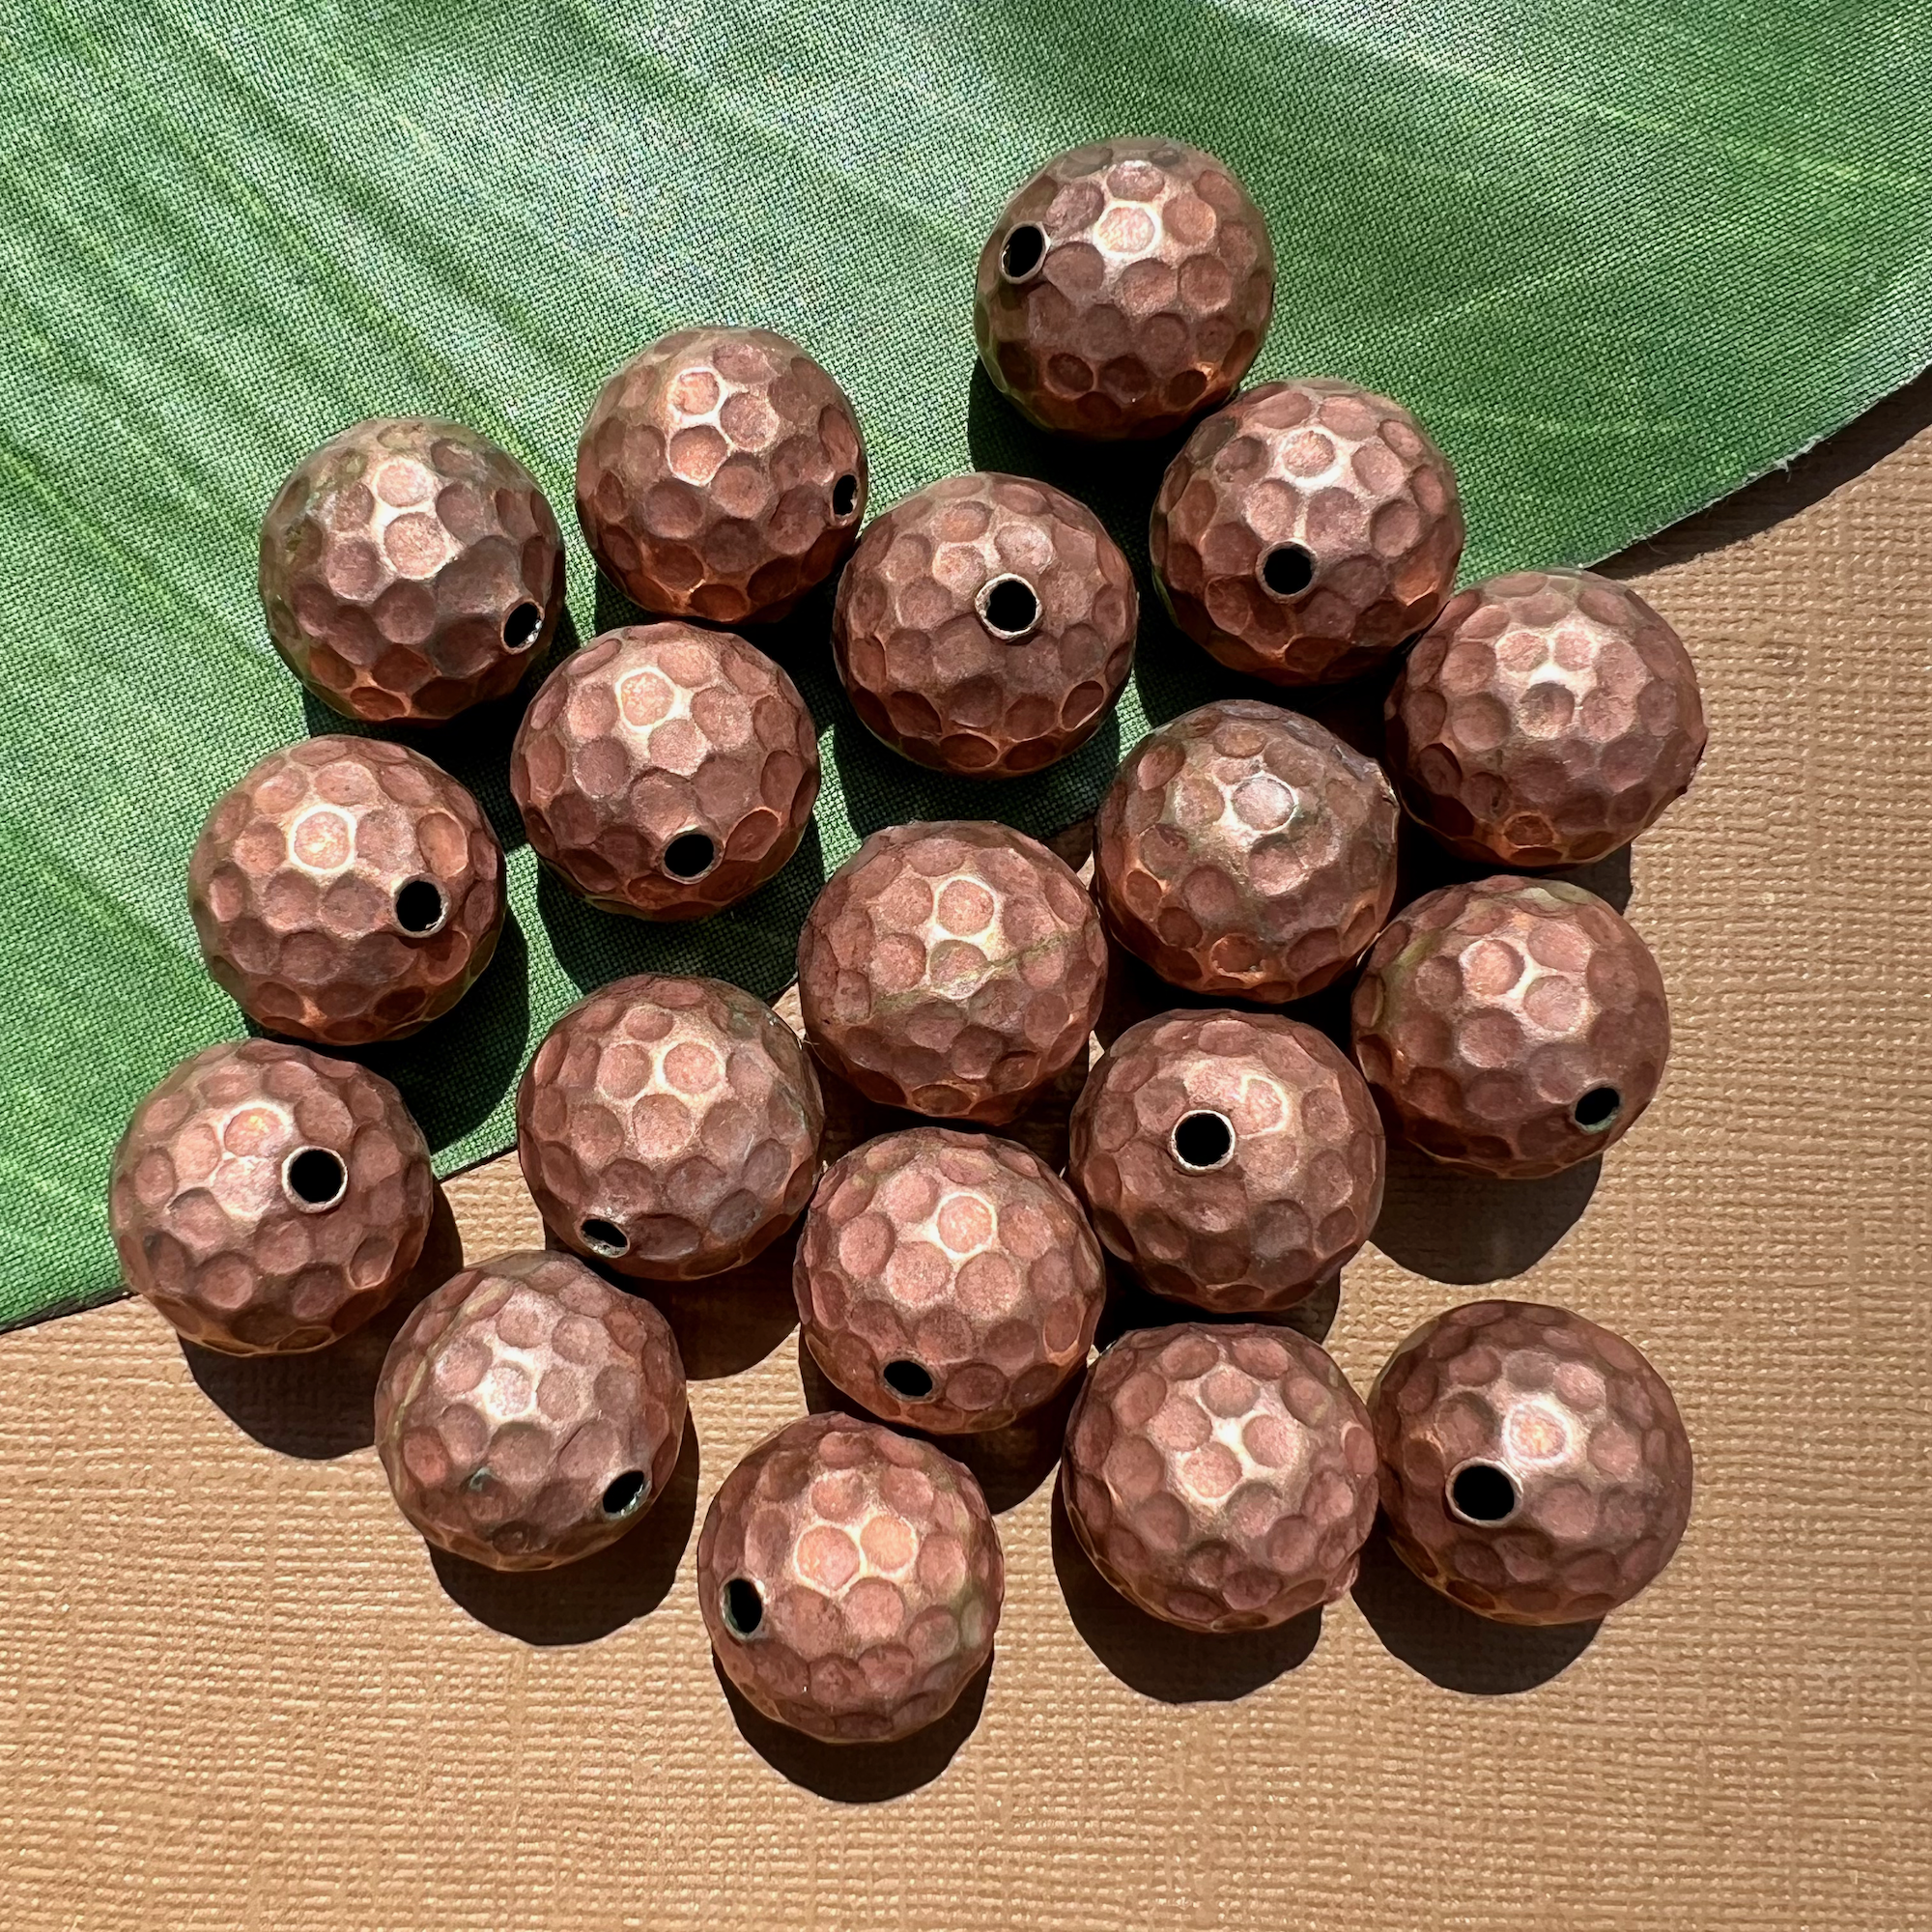 Nepal Copper 20mm Hammered Beads - 2 Pieces